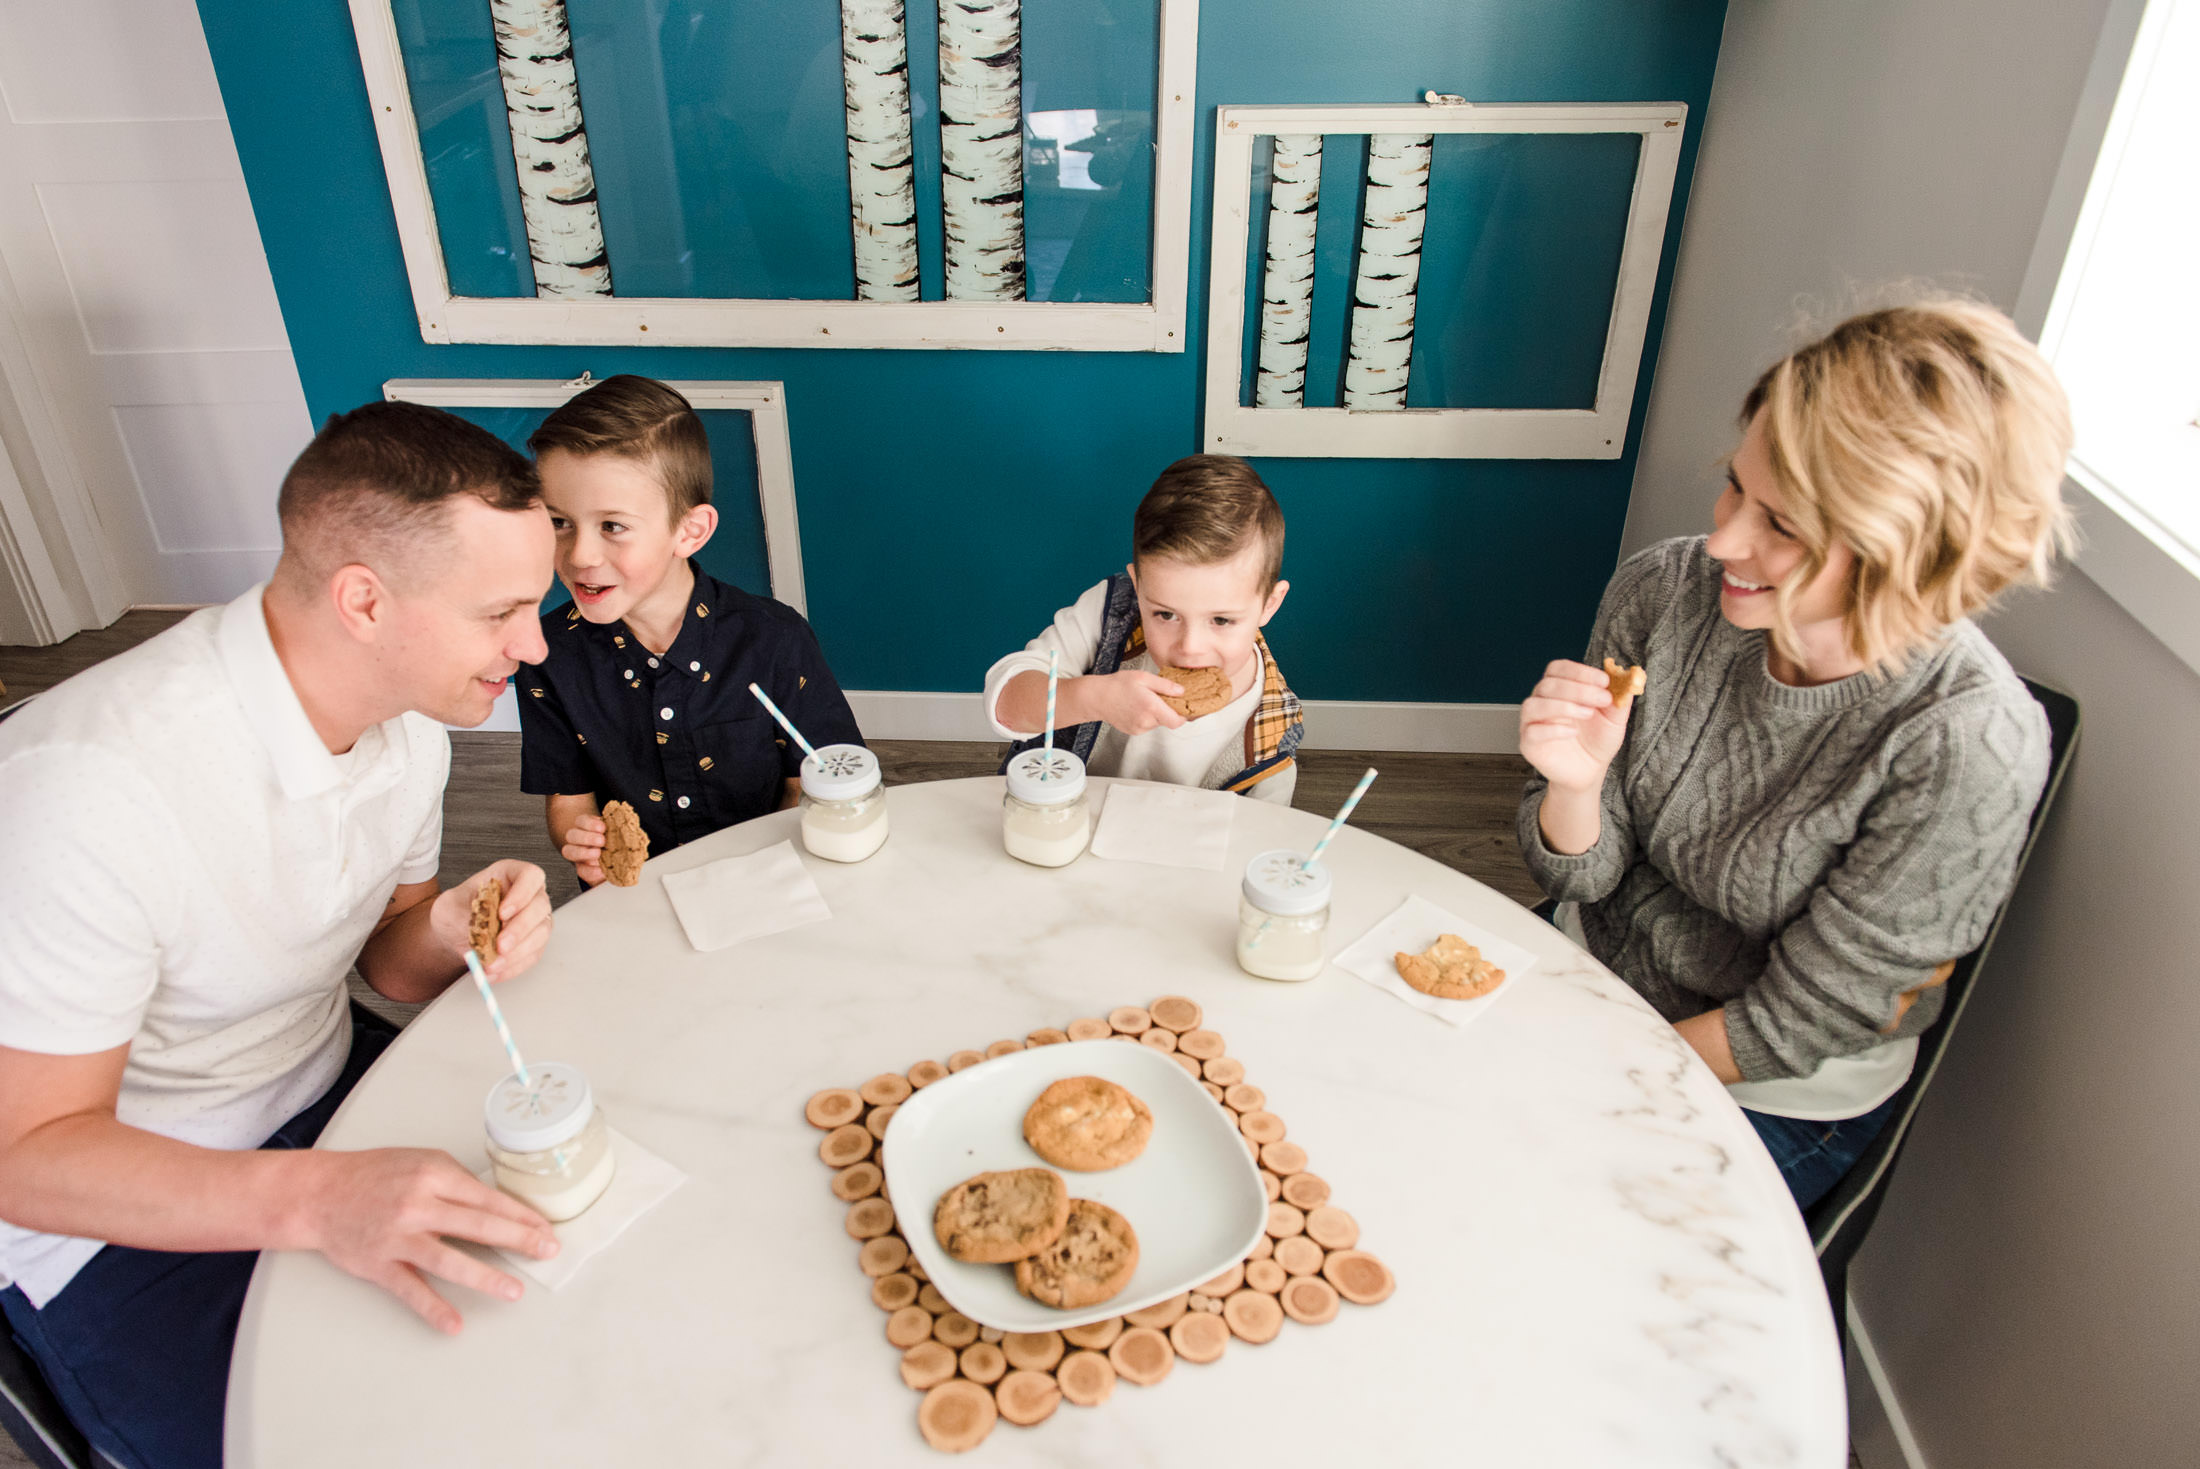 A family jokes around while eating cookies